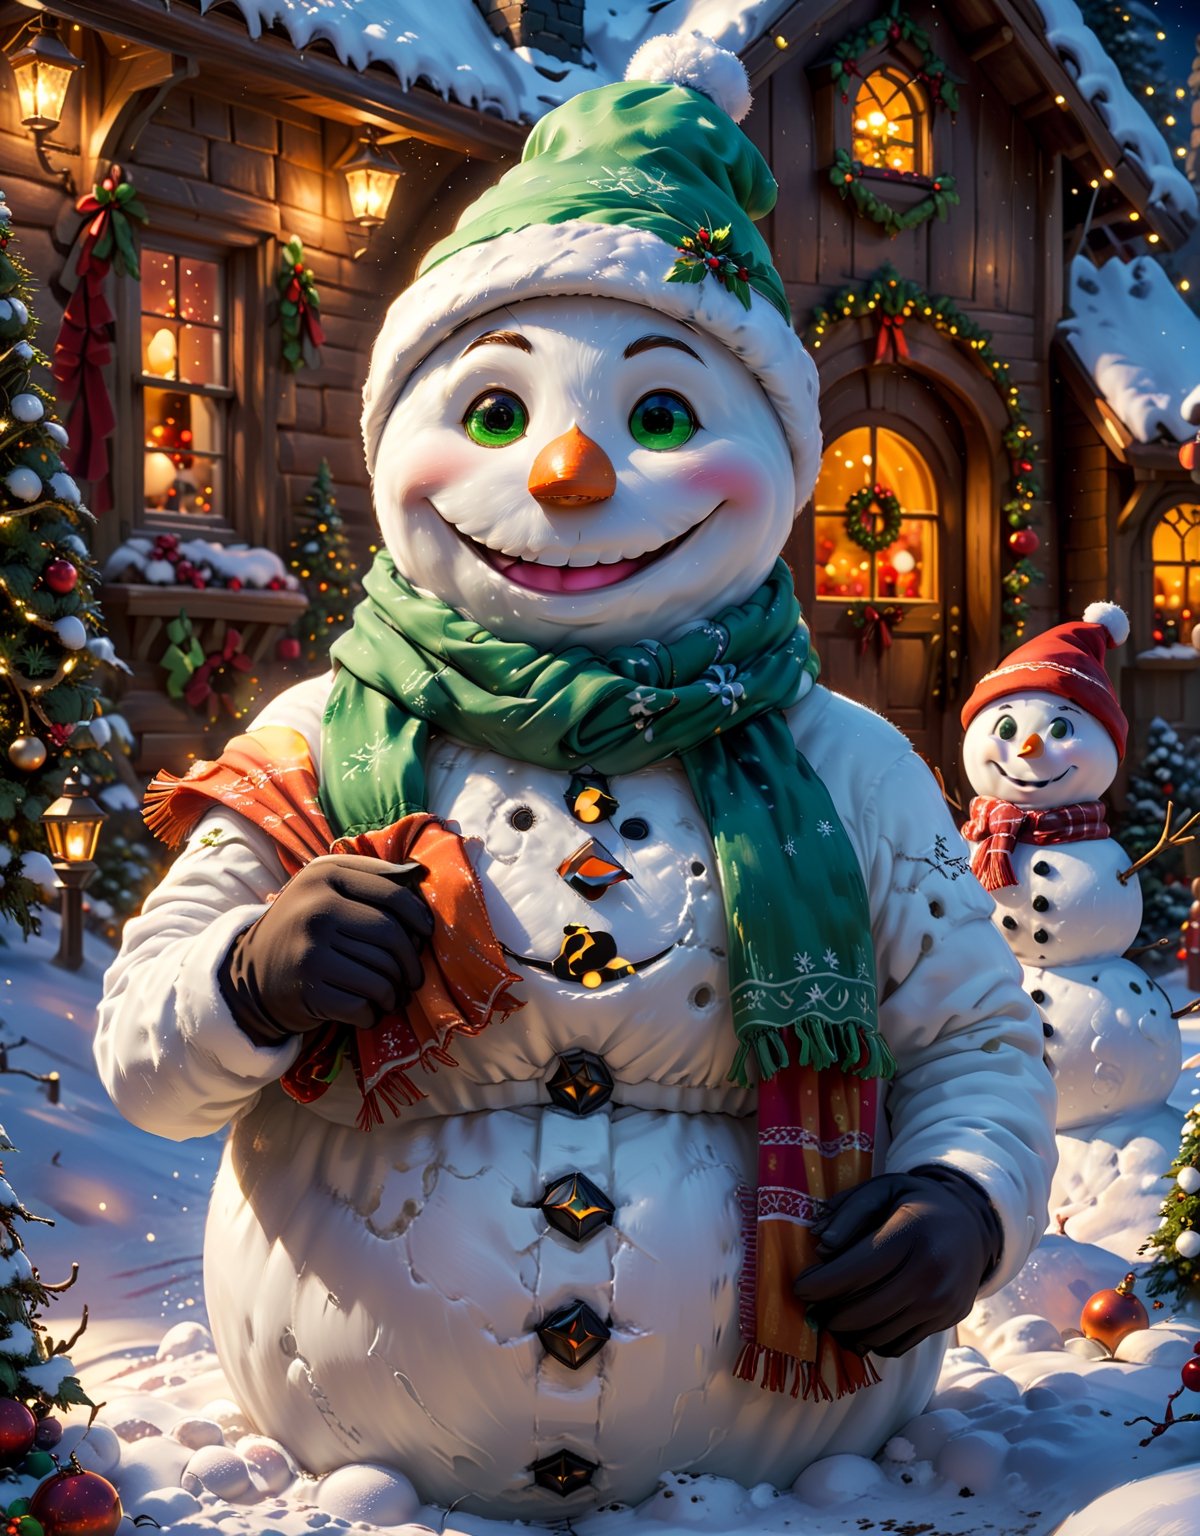 Masterpiece in maximum 16K resolution, realistic style with touches of fantasy, showcasing a beautiful snowman in a Christmas scene. | The snowman, wearing a charming scarf, a classic hat, and displaying big green eyes, is positioned in front of Santa's cozy house. Its carrot nose adds a charming touch, and its wooden hands are arranged in a welcoming manner, giving a beautiful smile. | The composition highlights the snowman in the foreground, with Santa's house in the background, creating a festive and warm atmosphere. The perspective emphasizes the friendly interaction of the snowman with the surroundings. | Night lighting effects enhance the details, with soft lights highlighting the snowman's face and hands. | Charming scene of a smiling snowman in front of Santa's house, creating a warm and festive atmosphere.